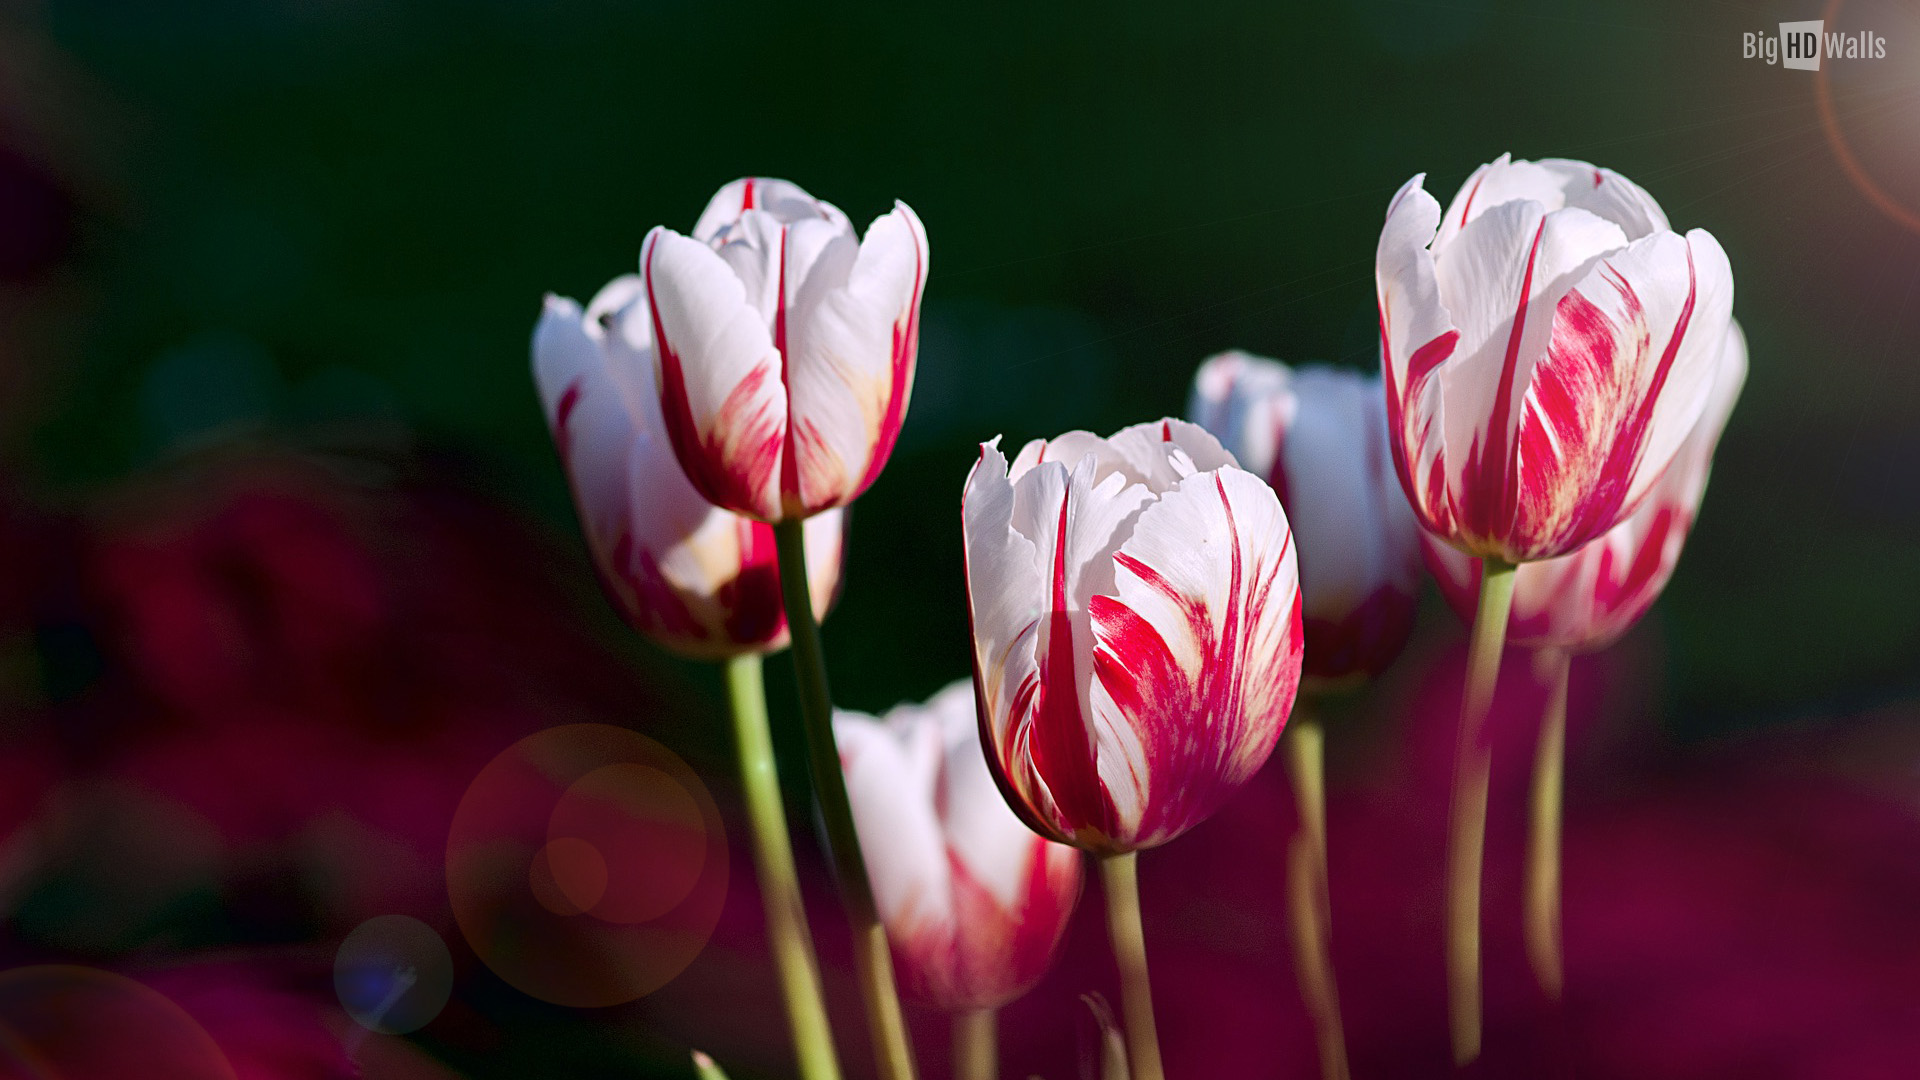 Red and White Tulips Wallpaper HD | BigHDWalls